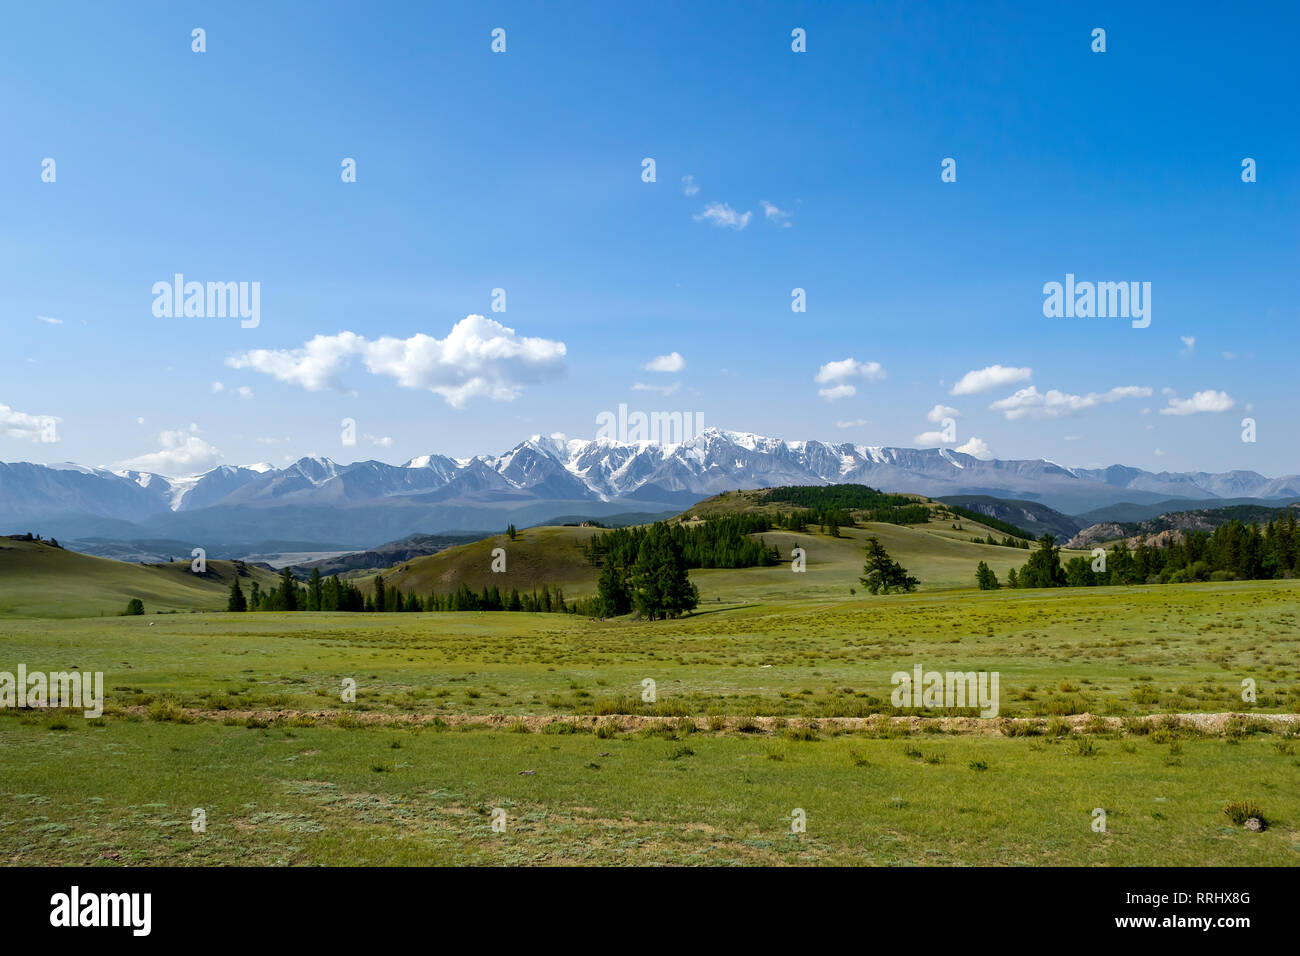 A meadow with lush green grass and coniferous trees stretching in front of the stone ridge of snow-capped peaks, a mountain range in a blue haze and w Stock Photo